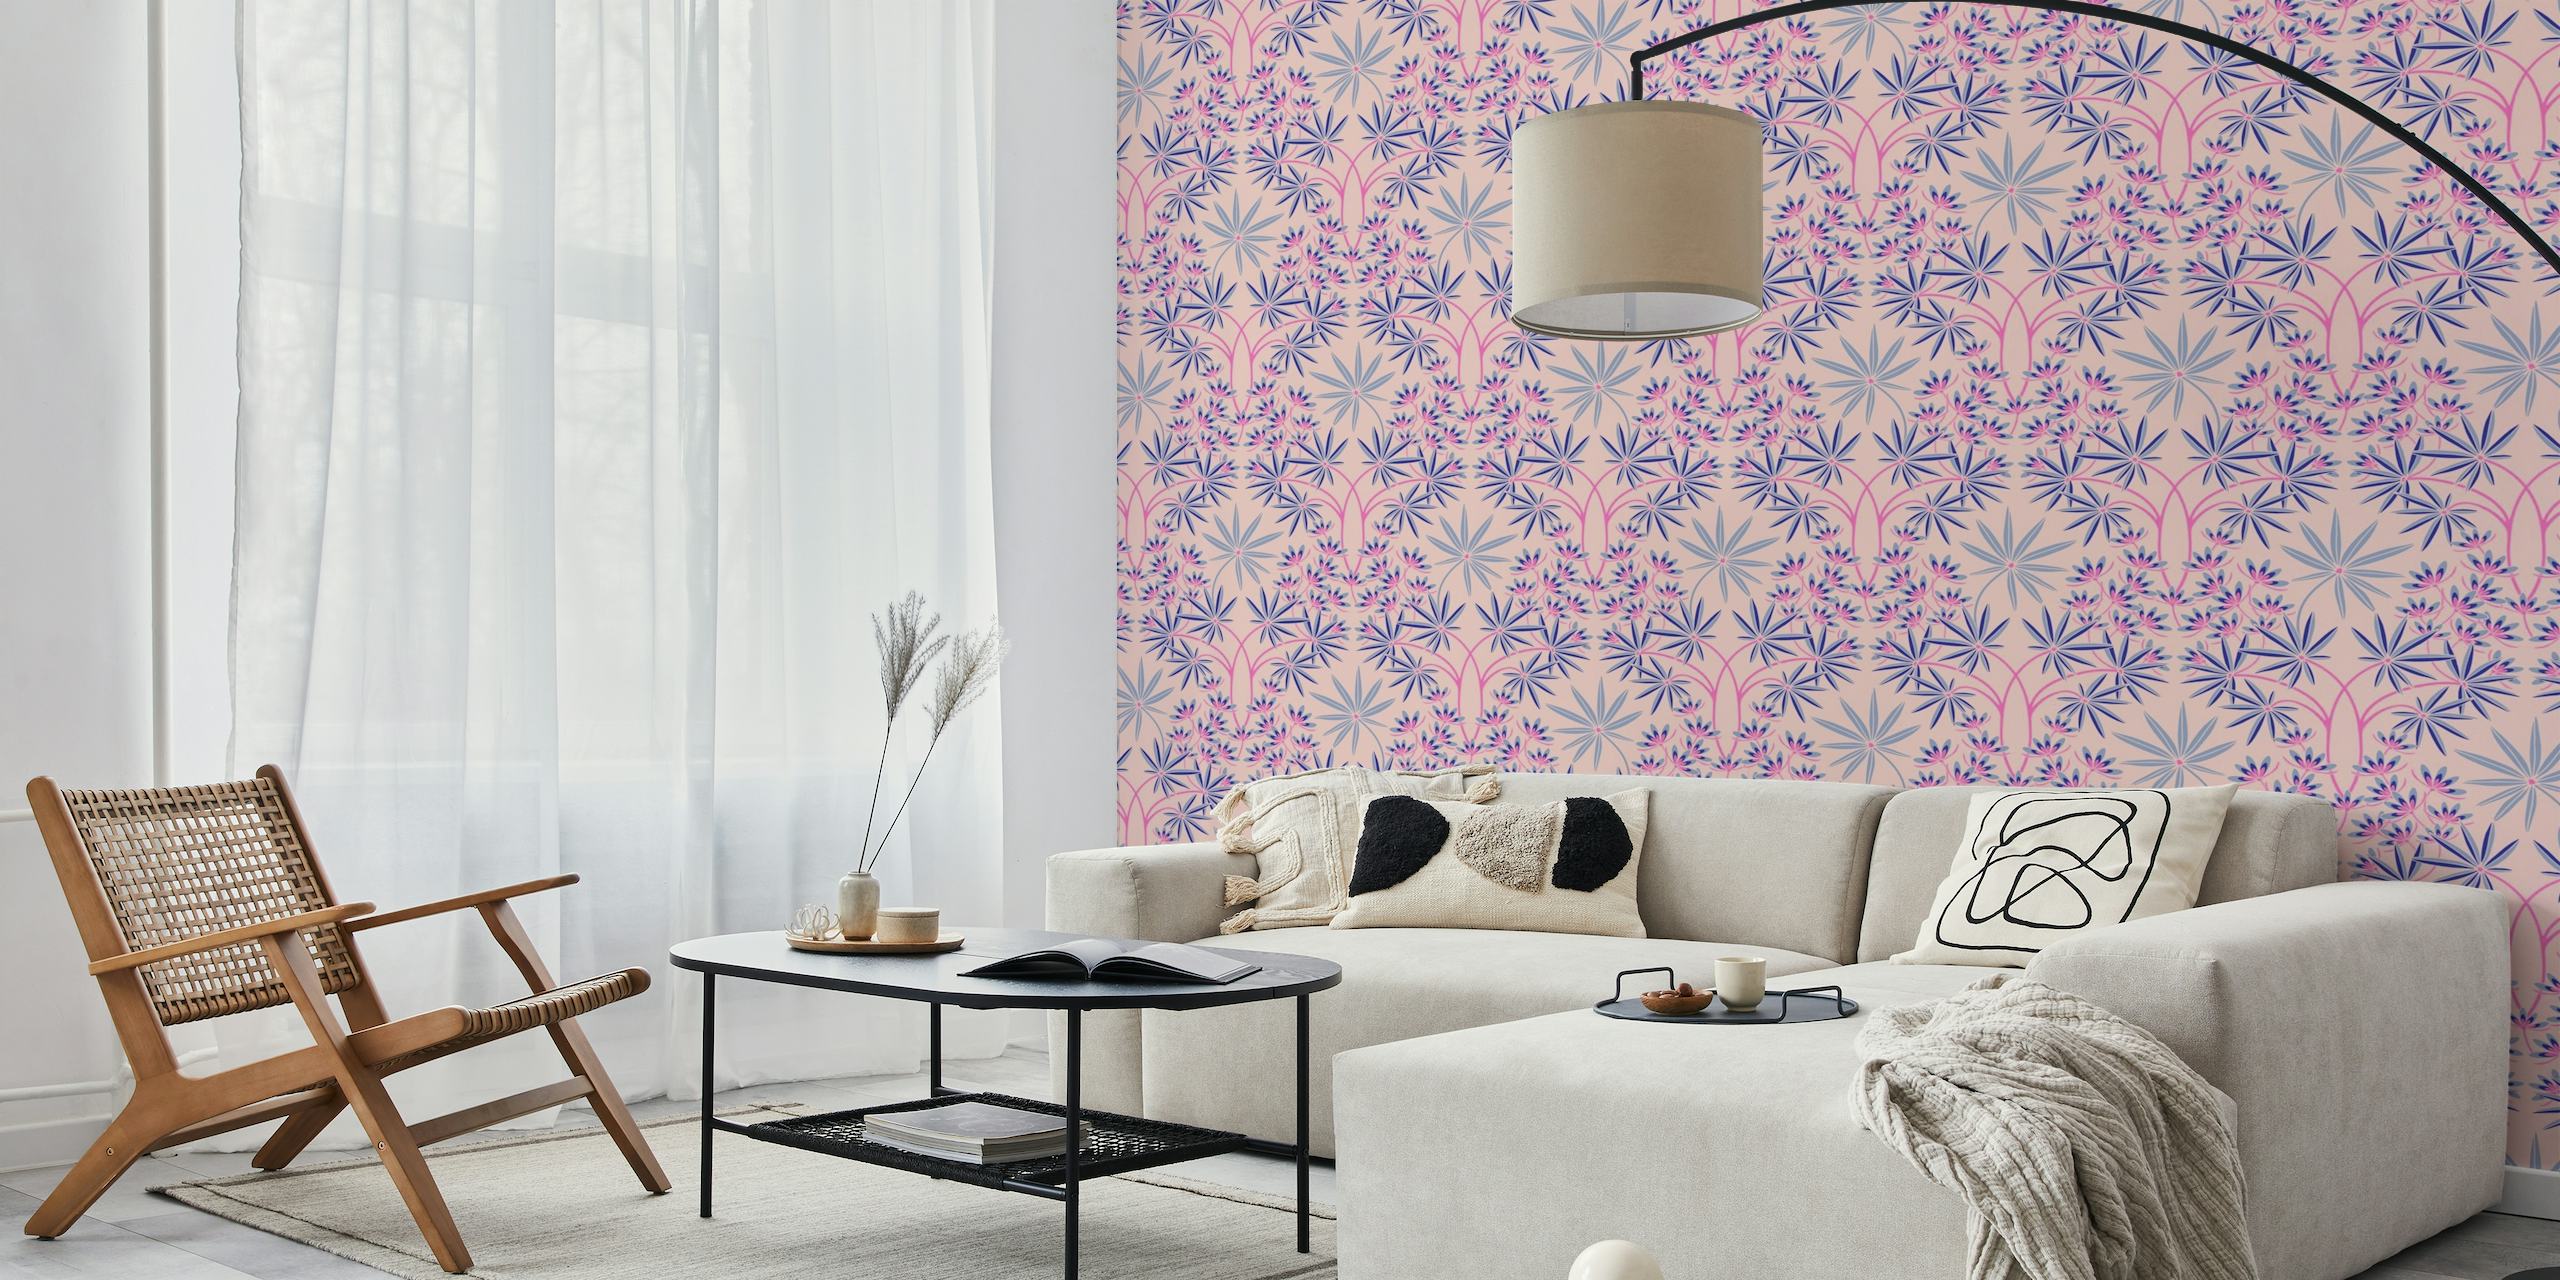 Elegant light pink floral damask wall mural with subtle blue accents for home decor